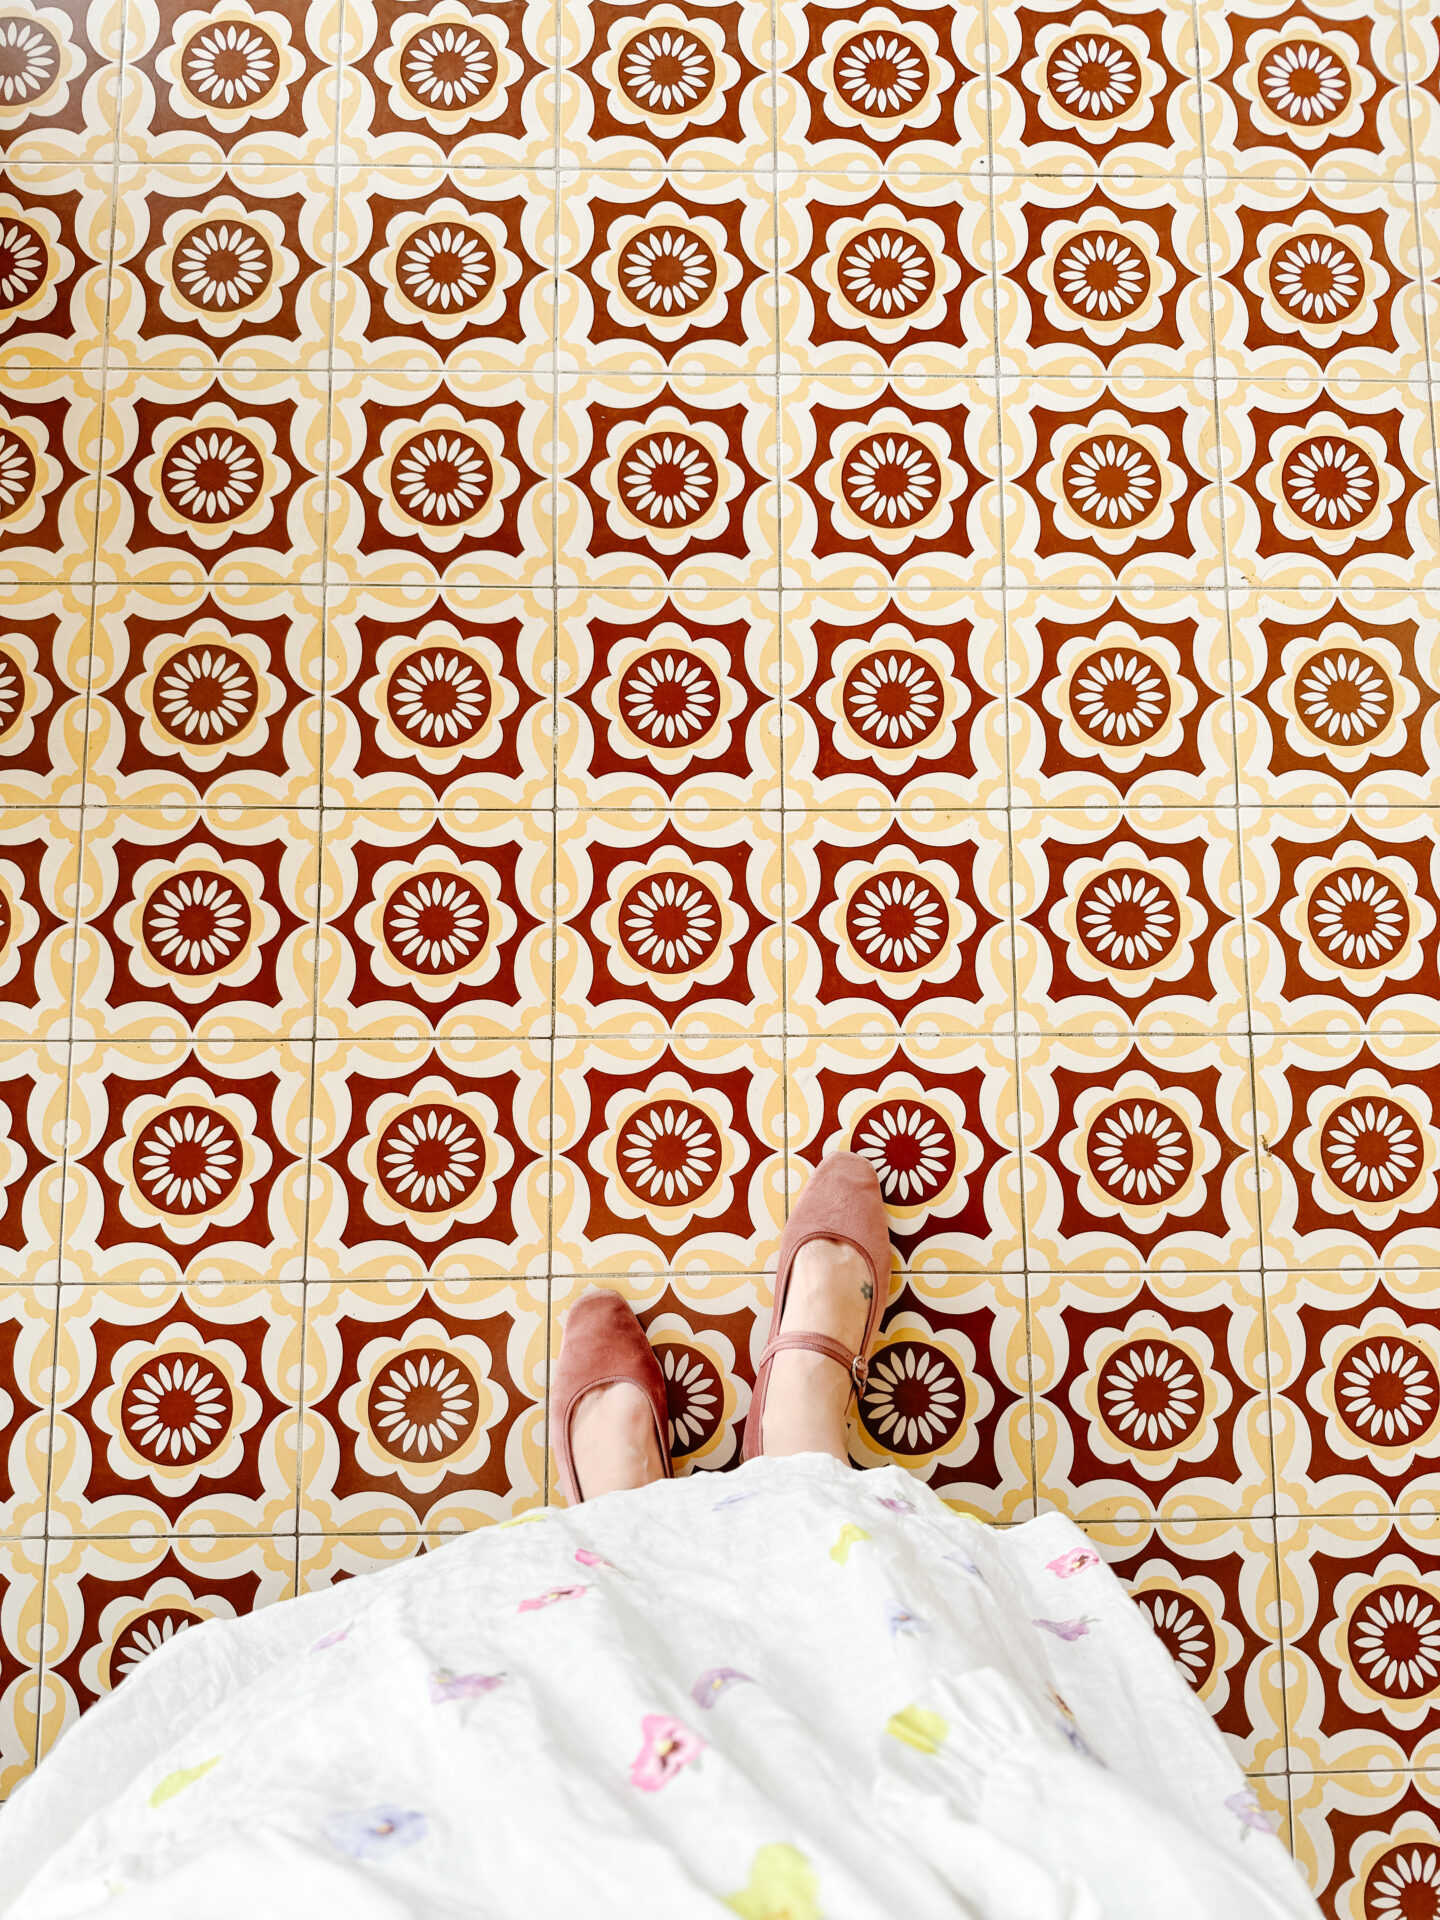 Venezuelan Tile Heaven: My Fave Spring Shoes You Need in Your Closet